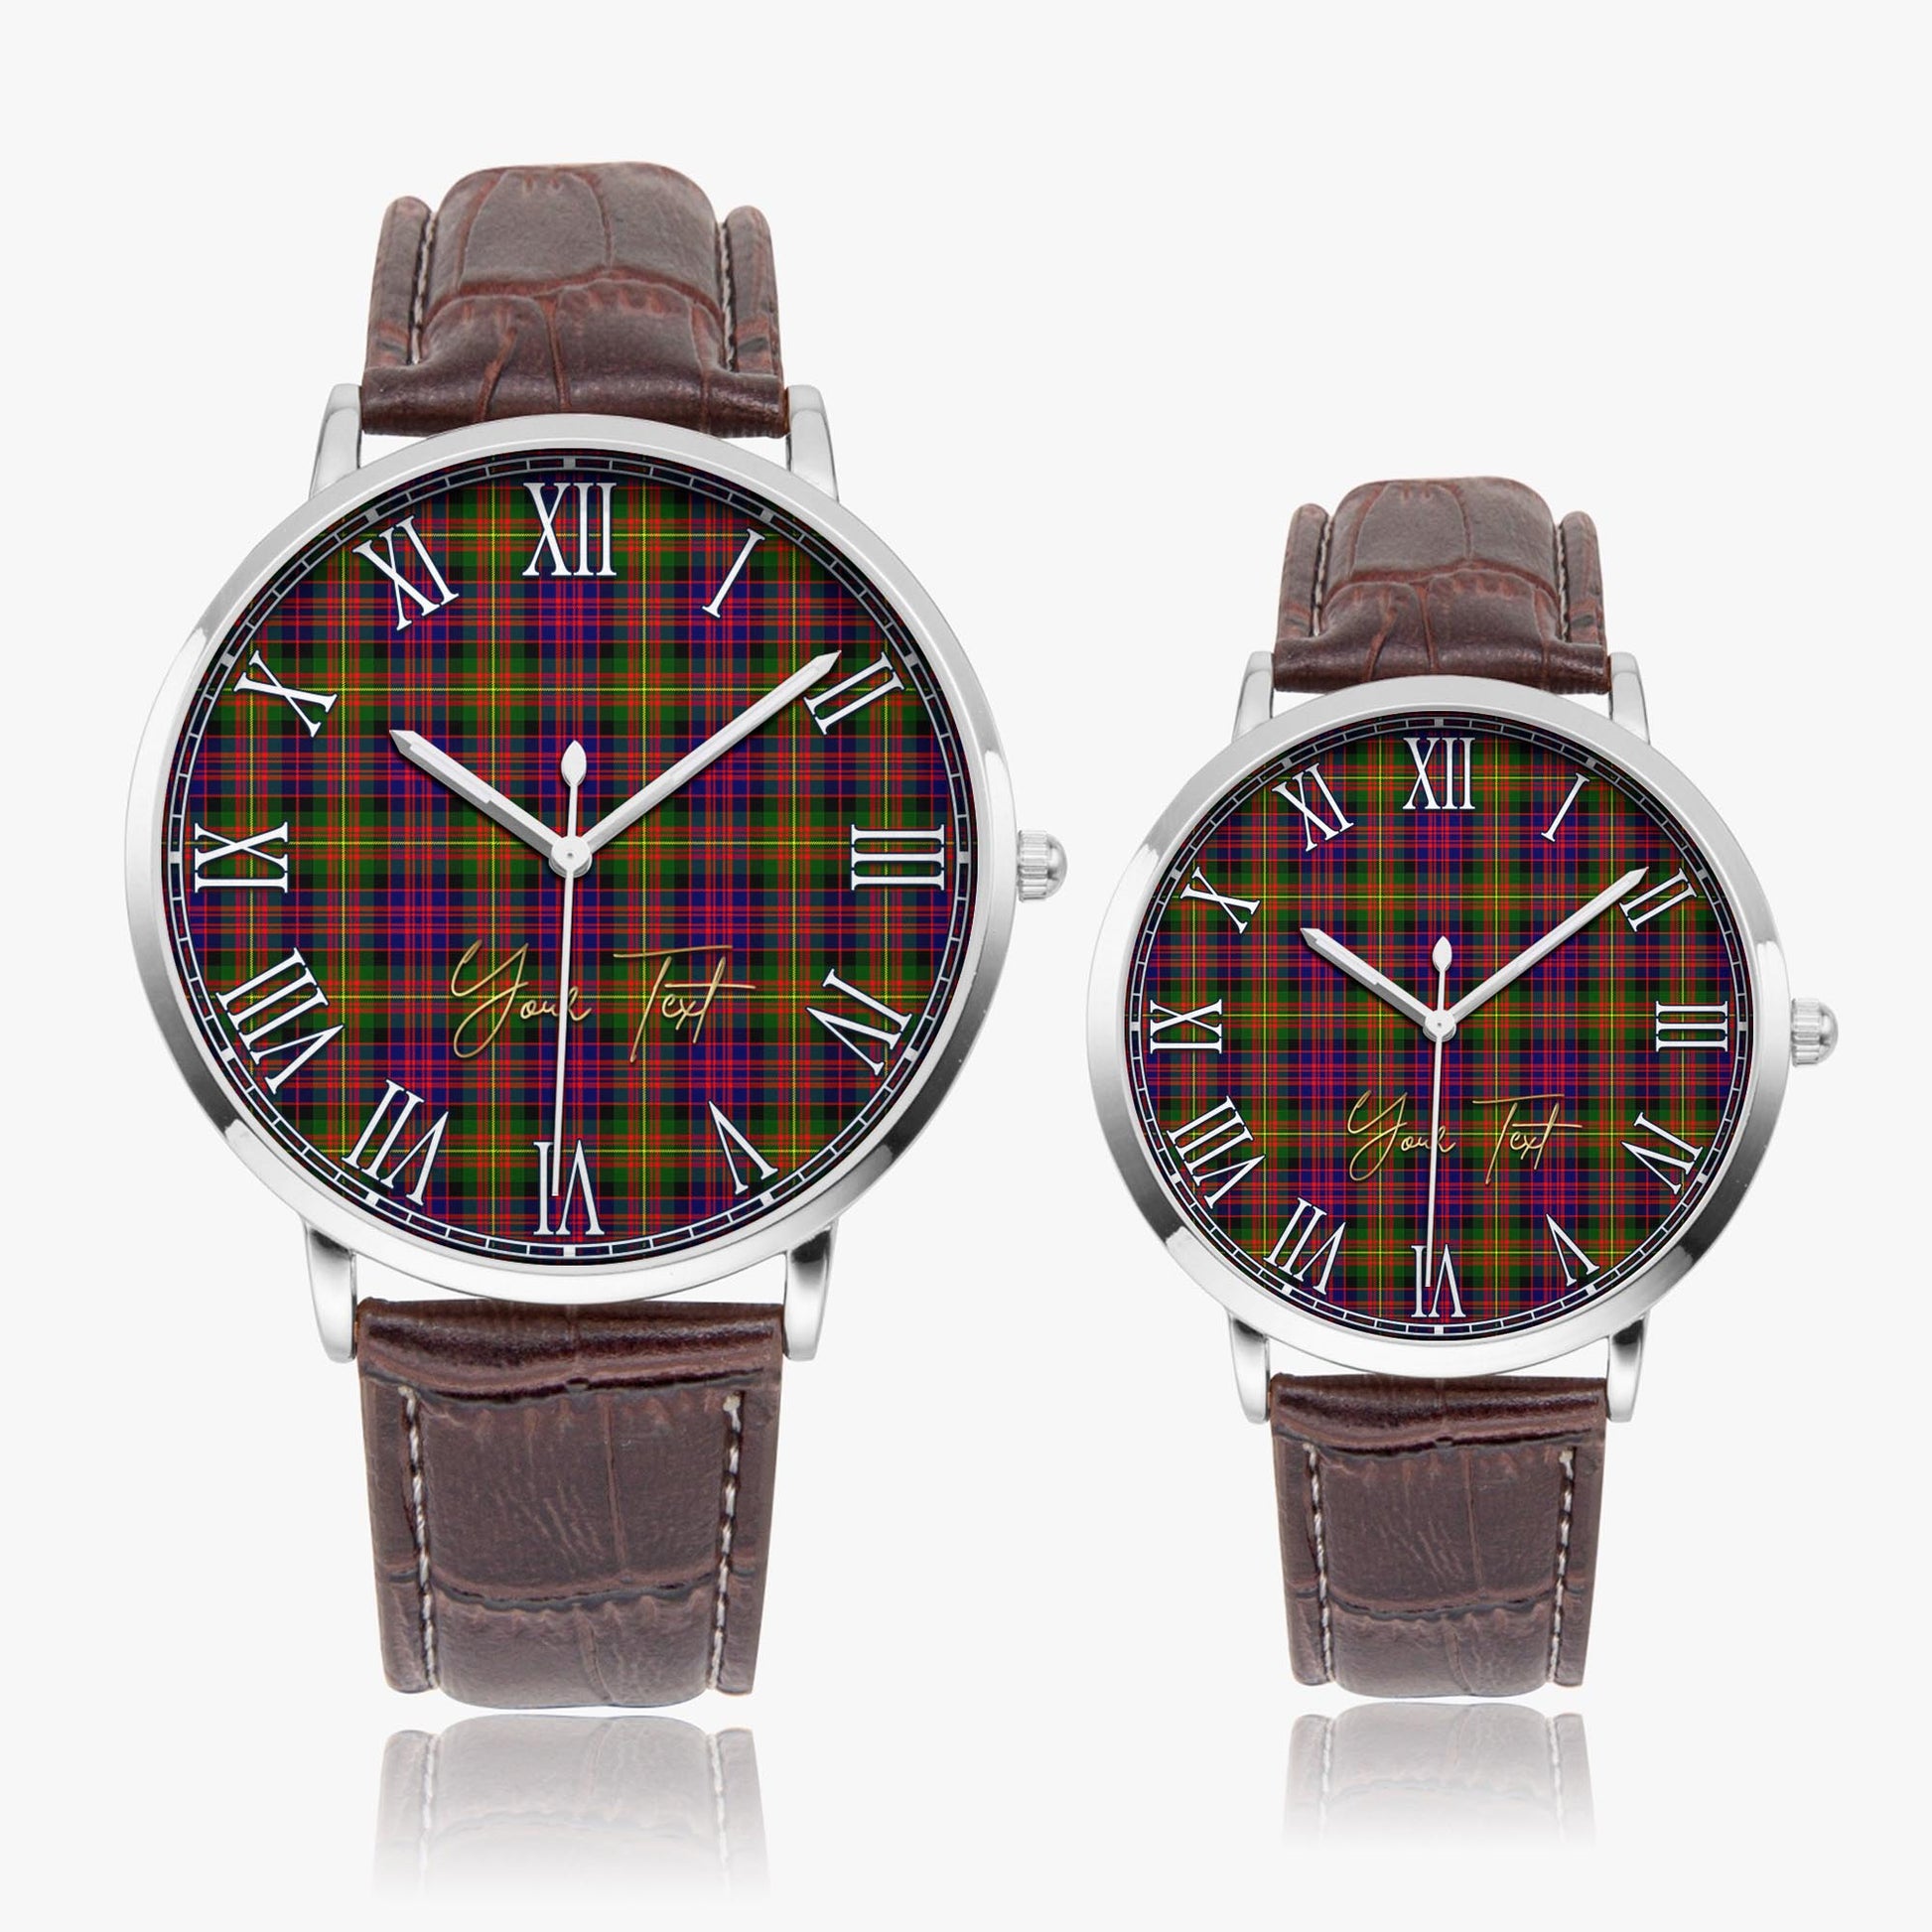 Carnegie Modern Tartan Personalized Your Text Leather Trap Quartz Watch Ultra Thin Silver Case With Brown Leather Strap - Tartanvibesclothing